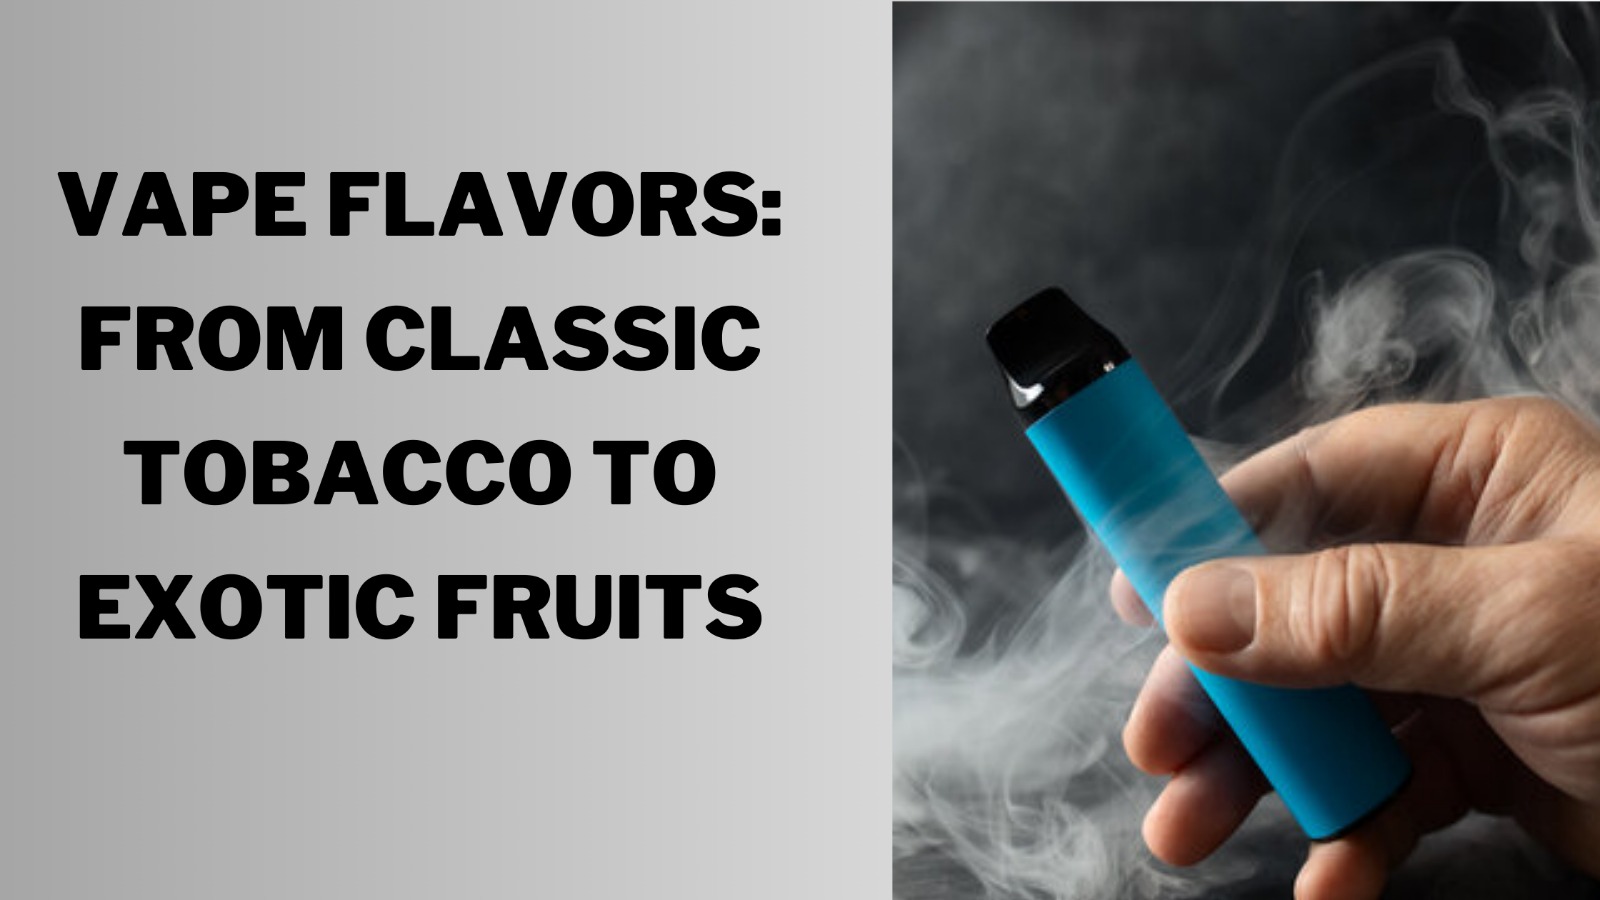 Vape Flavors: From Classic Tobacco to Exotic Fruits